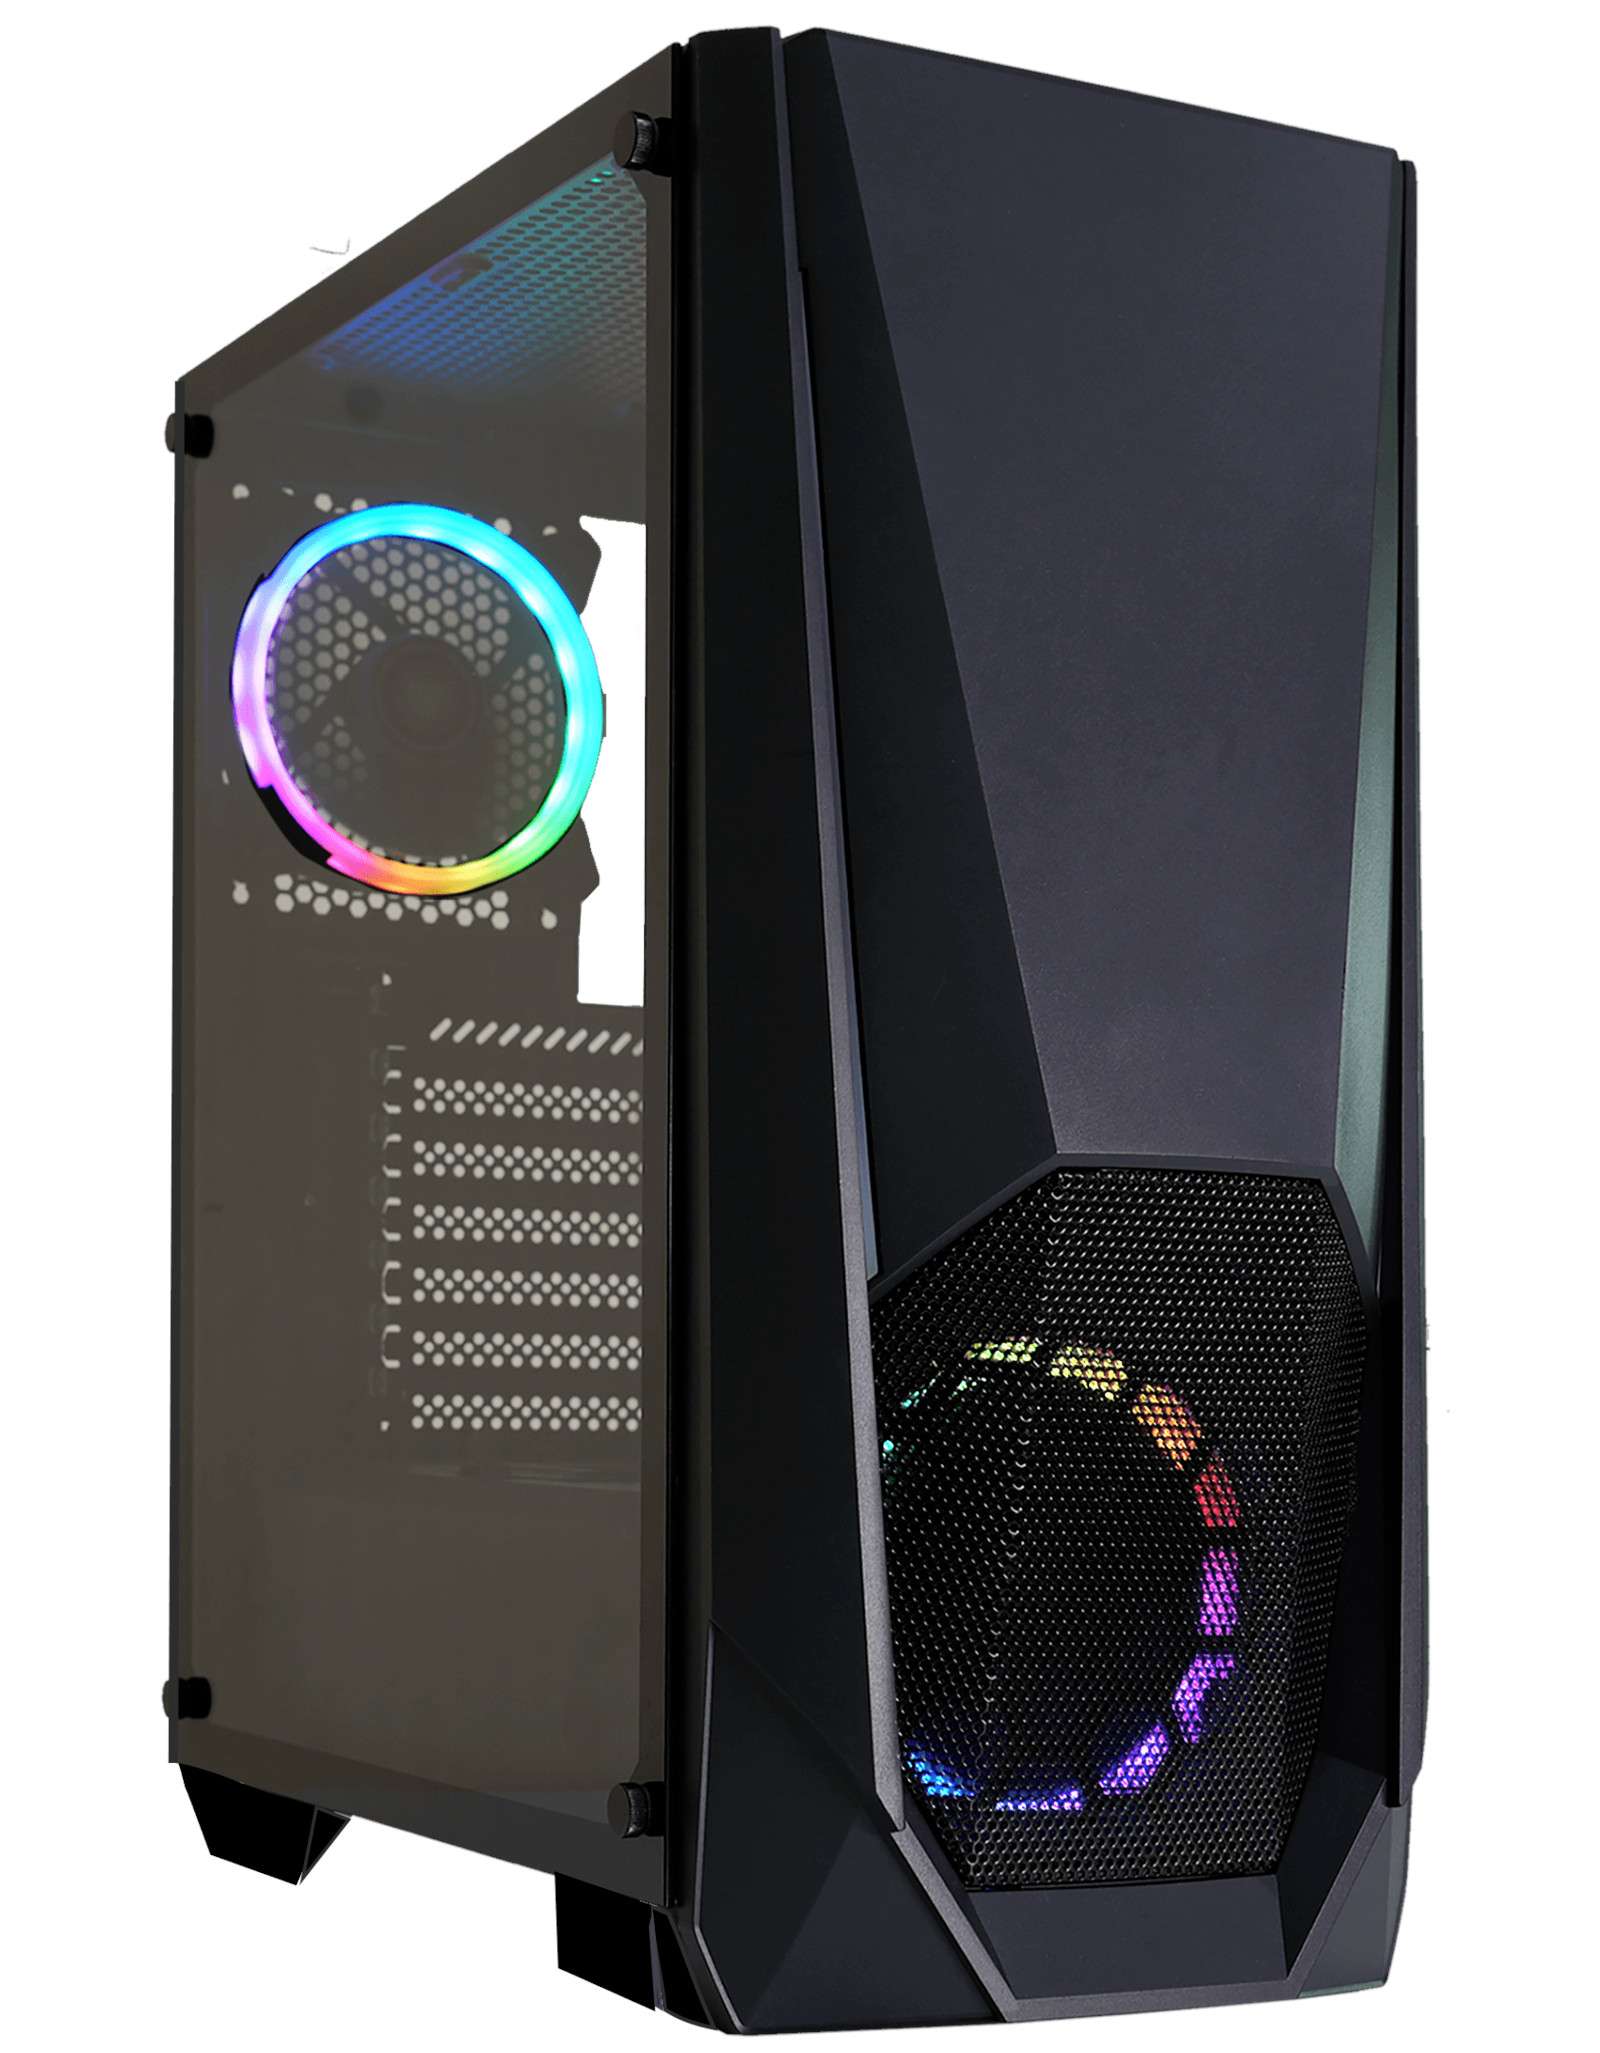 Firebreather Enthousiast Z790 I36890 Intel Core i5 13600KF 14-Core (20 threads) tot 5.10Ghz Nvidia RTX 3070 Ti kaart 500GB NVME SSD 16GB DDR4